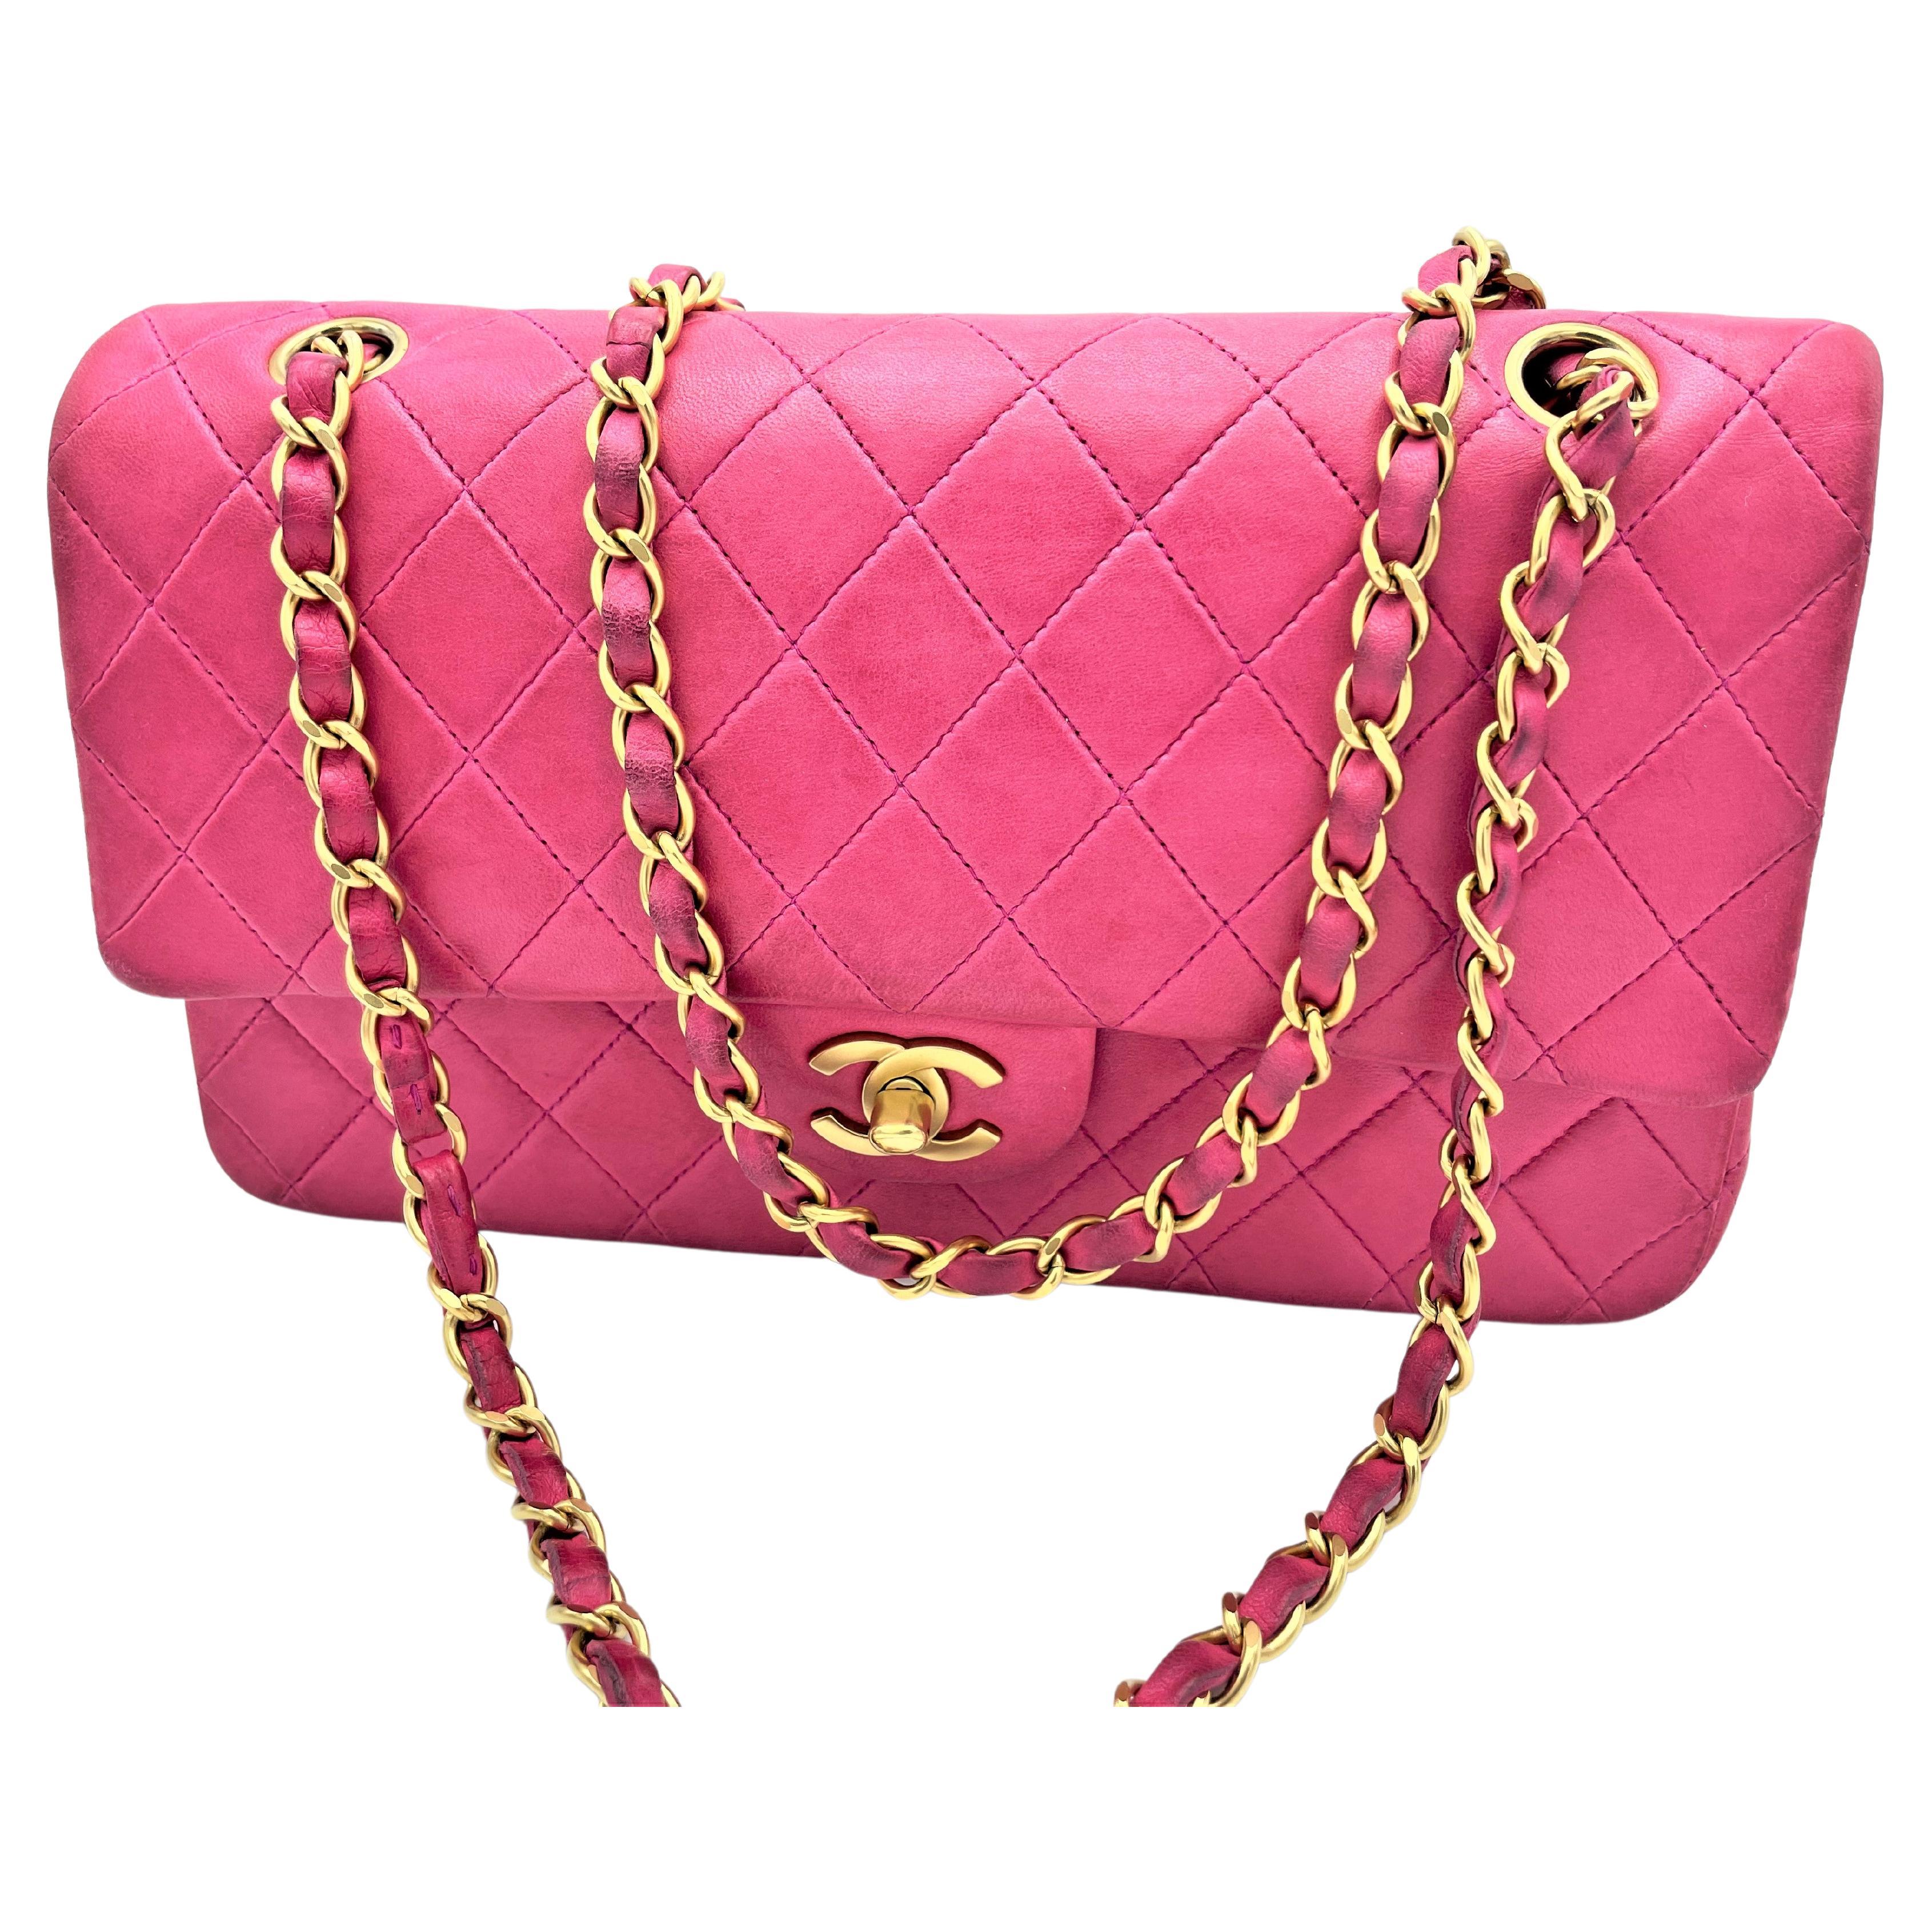 Vintage CHANEL quilted double flap bag, lambskin leather, medium in pink,   